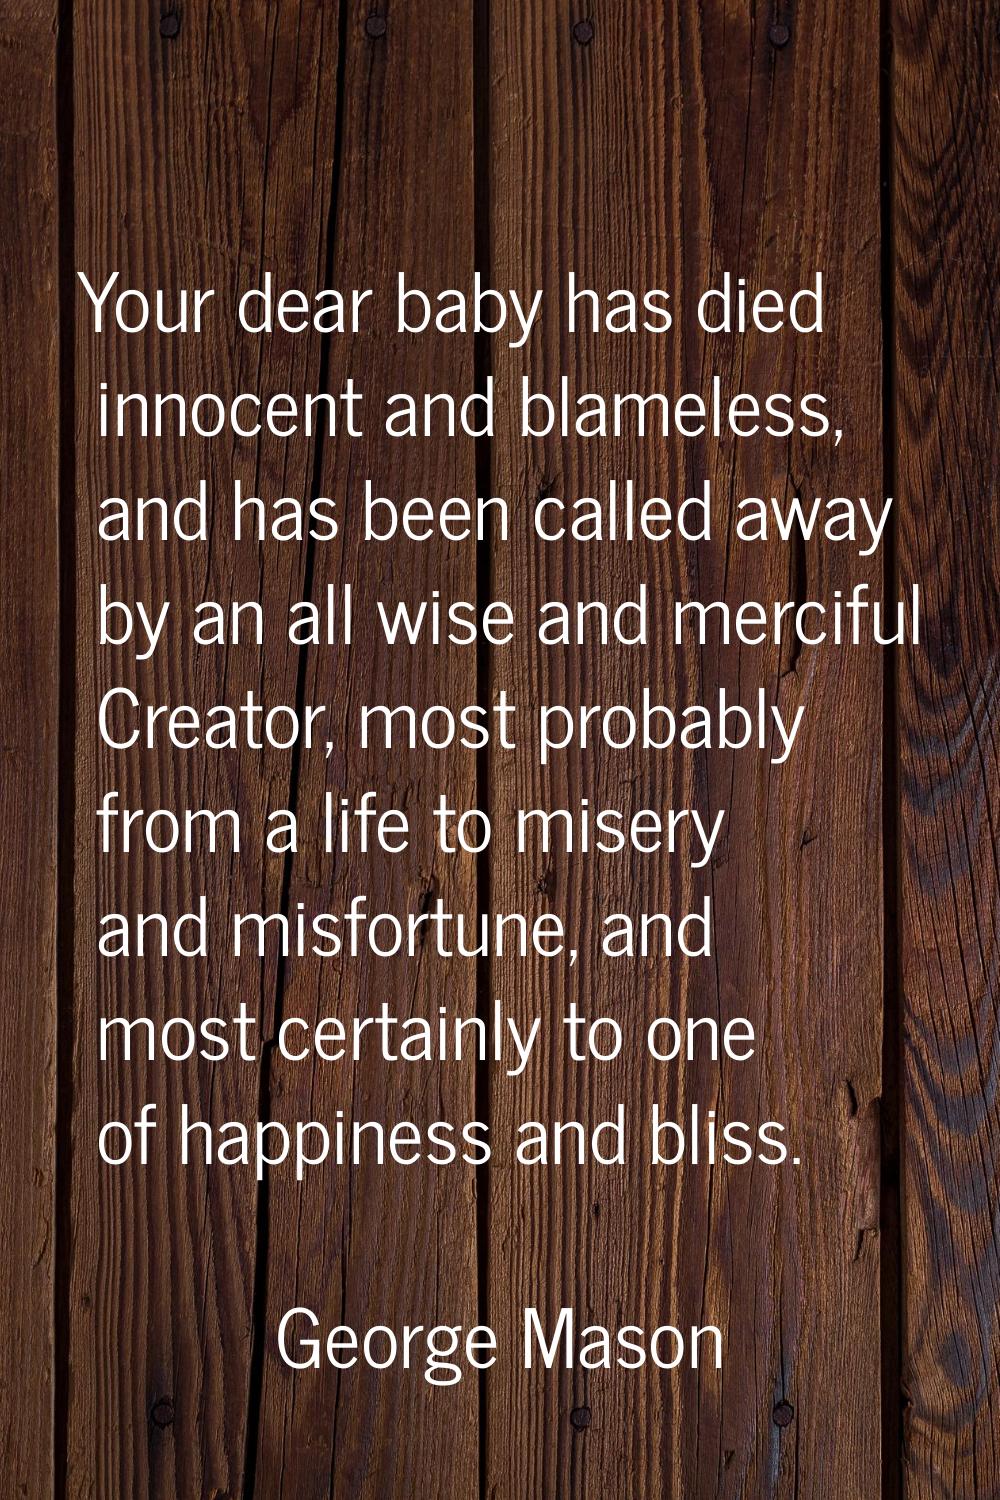 Your dear baby has died innocent and blameless, and has been called away by an all wise and mercifu